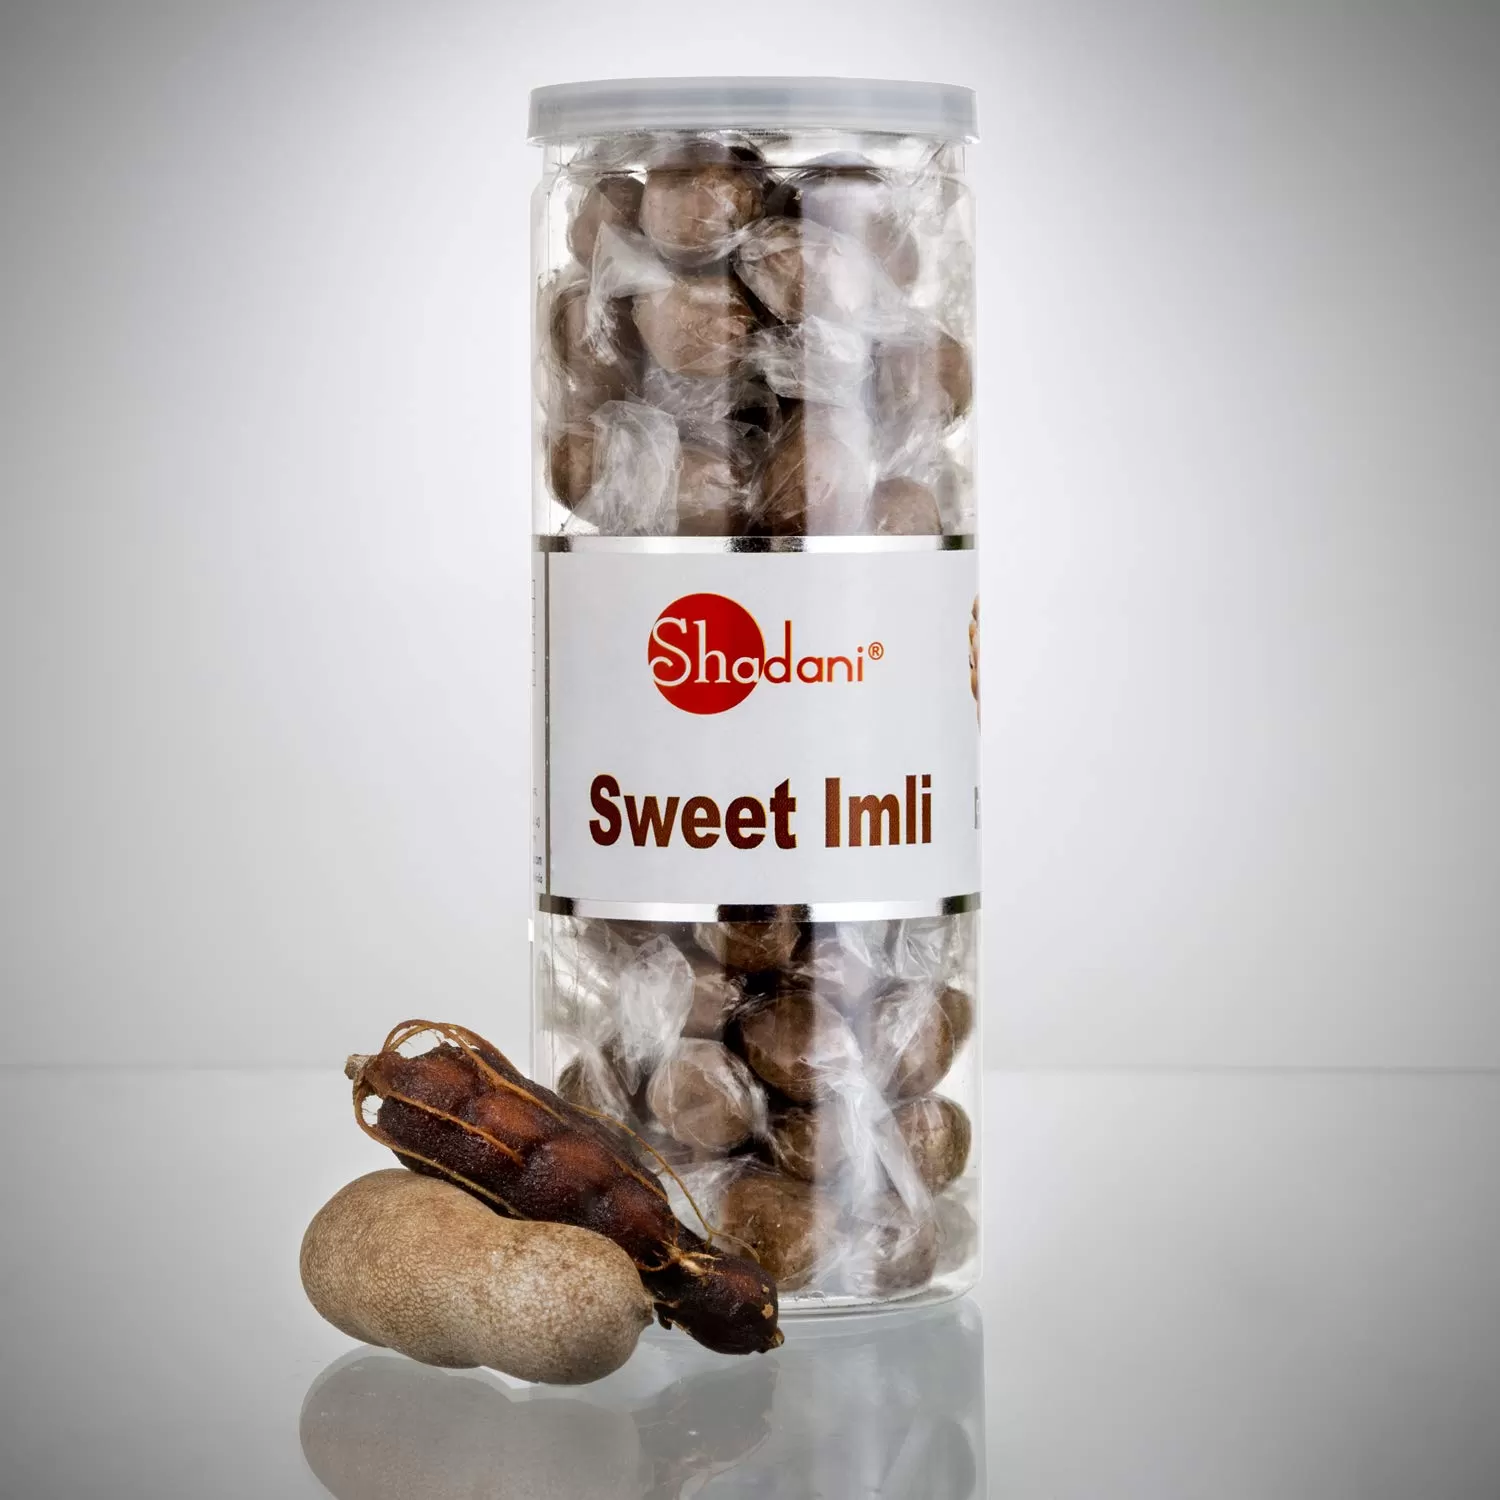 Sweet Imli (Tamarind) Soft Candy Box - Indian Special Sweet and Sour Flavour 140 GR (4.93), 2 image